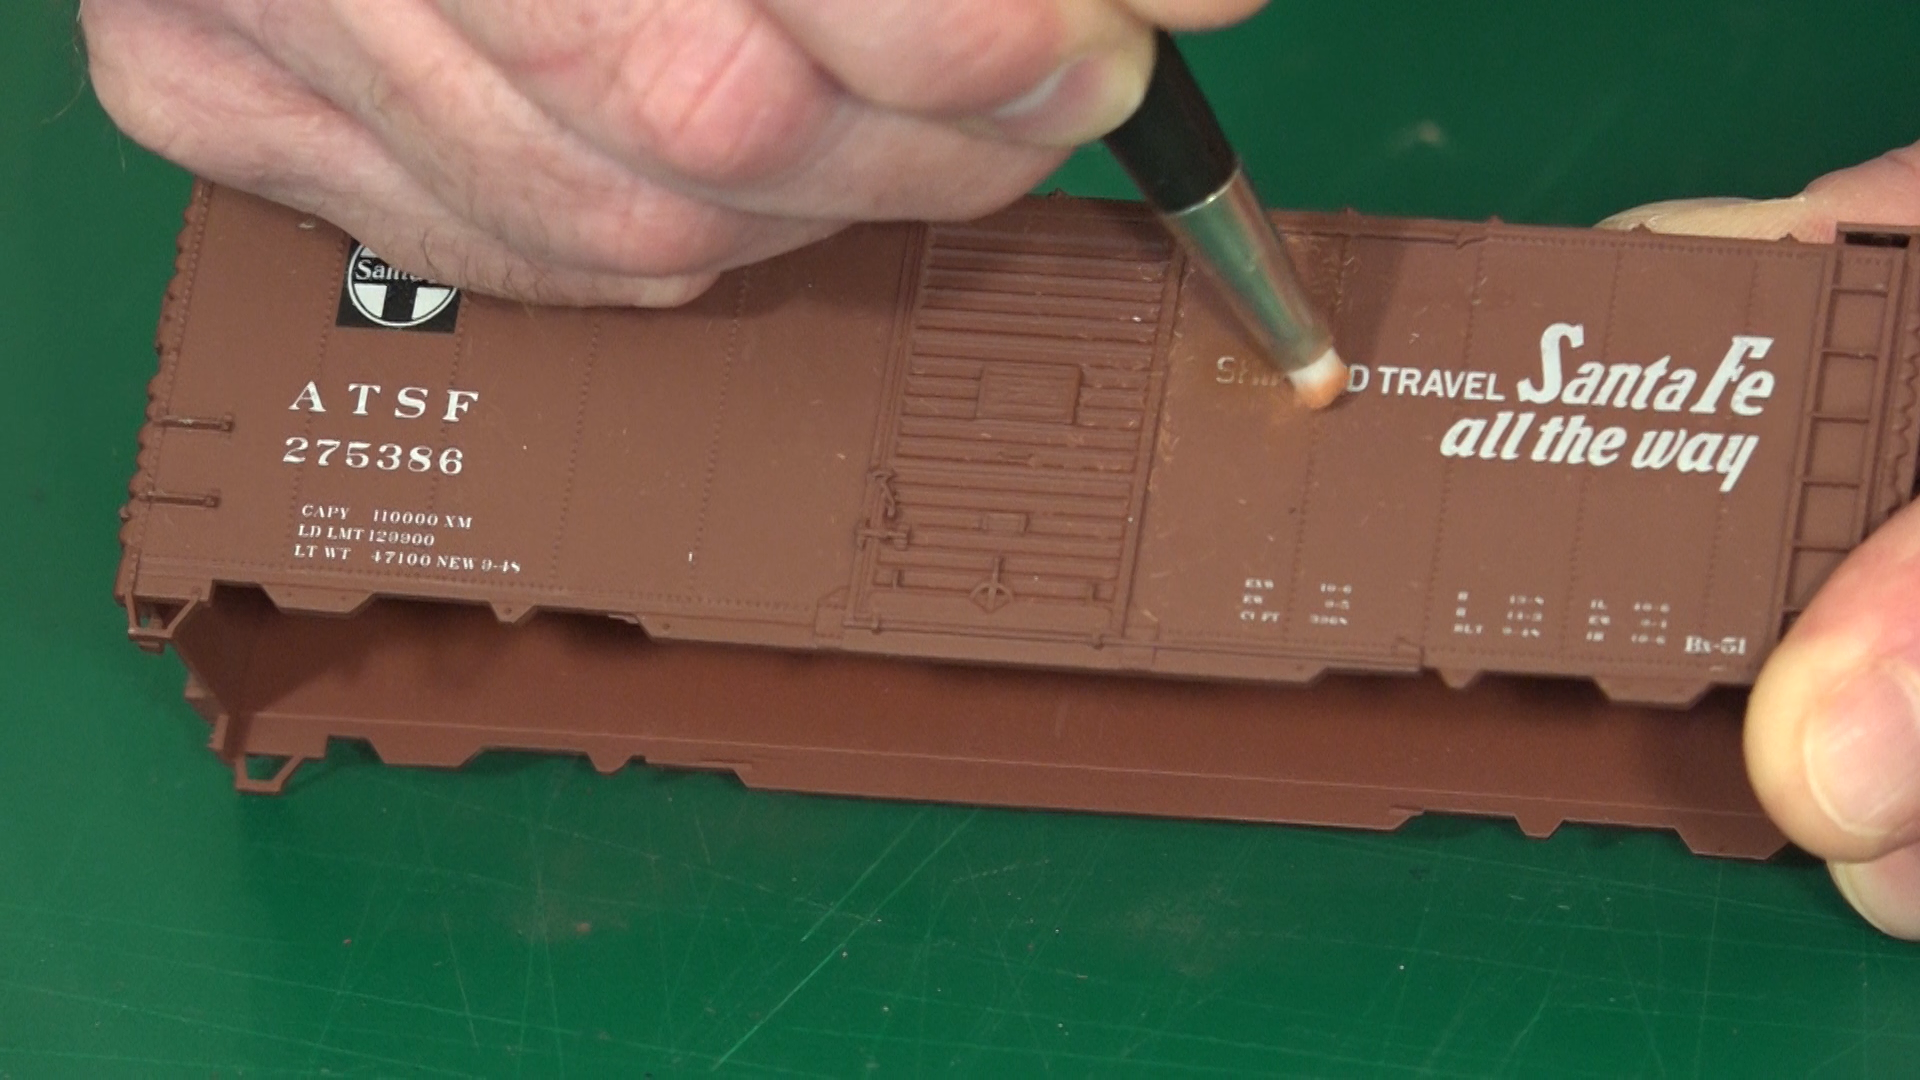 Model Railroading Tips: Weathering with a Scratch Brushproduct featured image thumbnail.